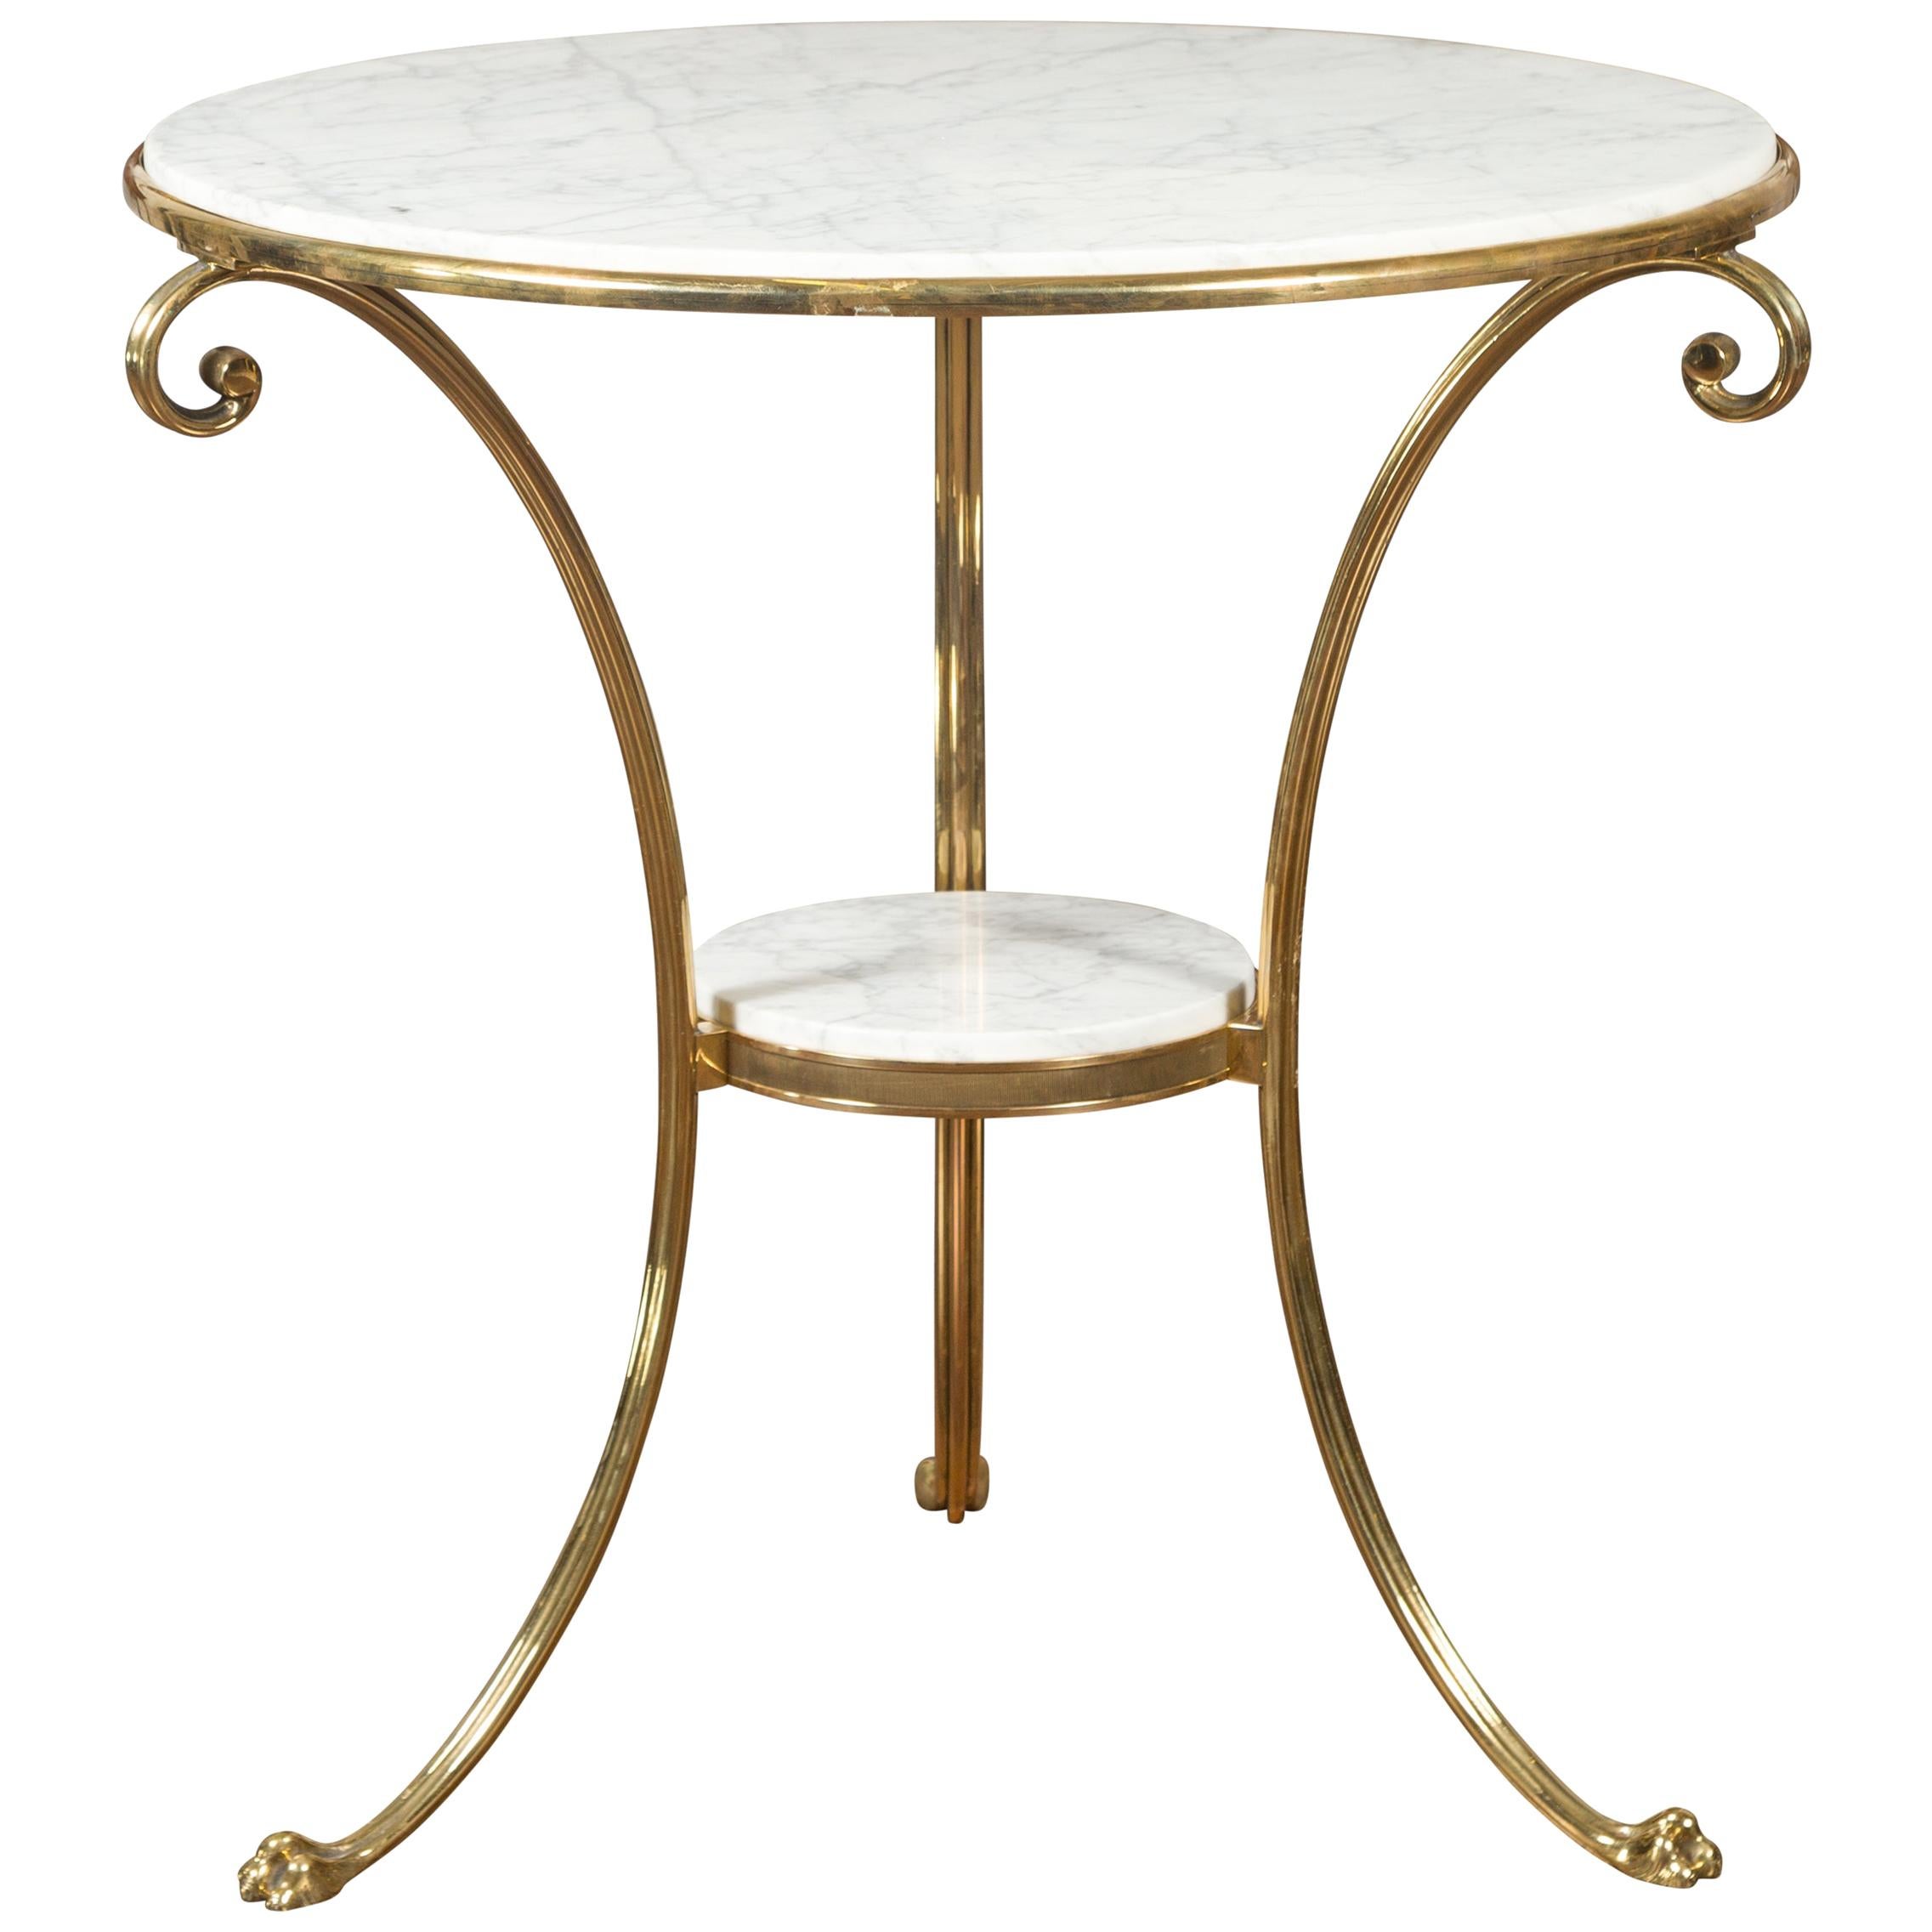 Midcentury Italian Brass Table with Round White Marble Top and Scrolling Legs